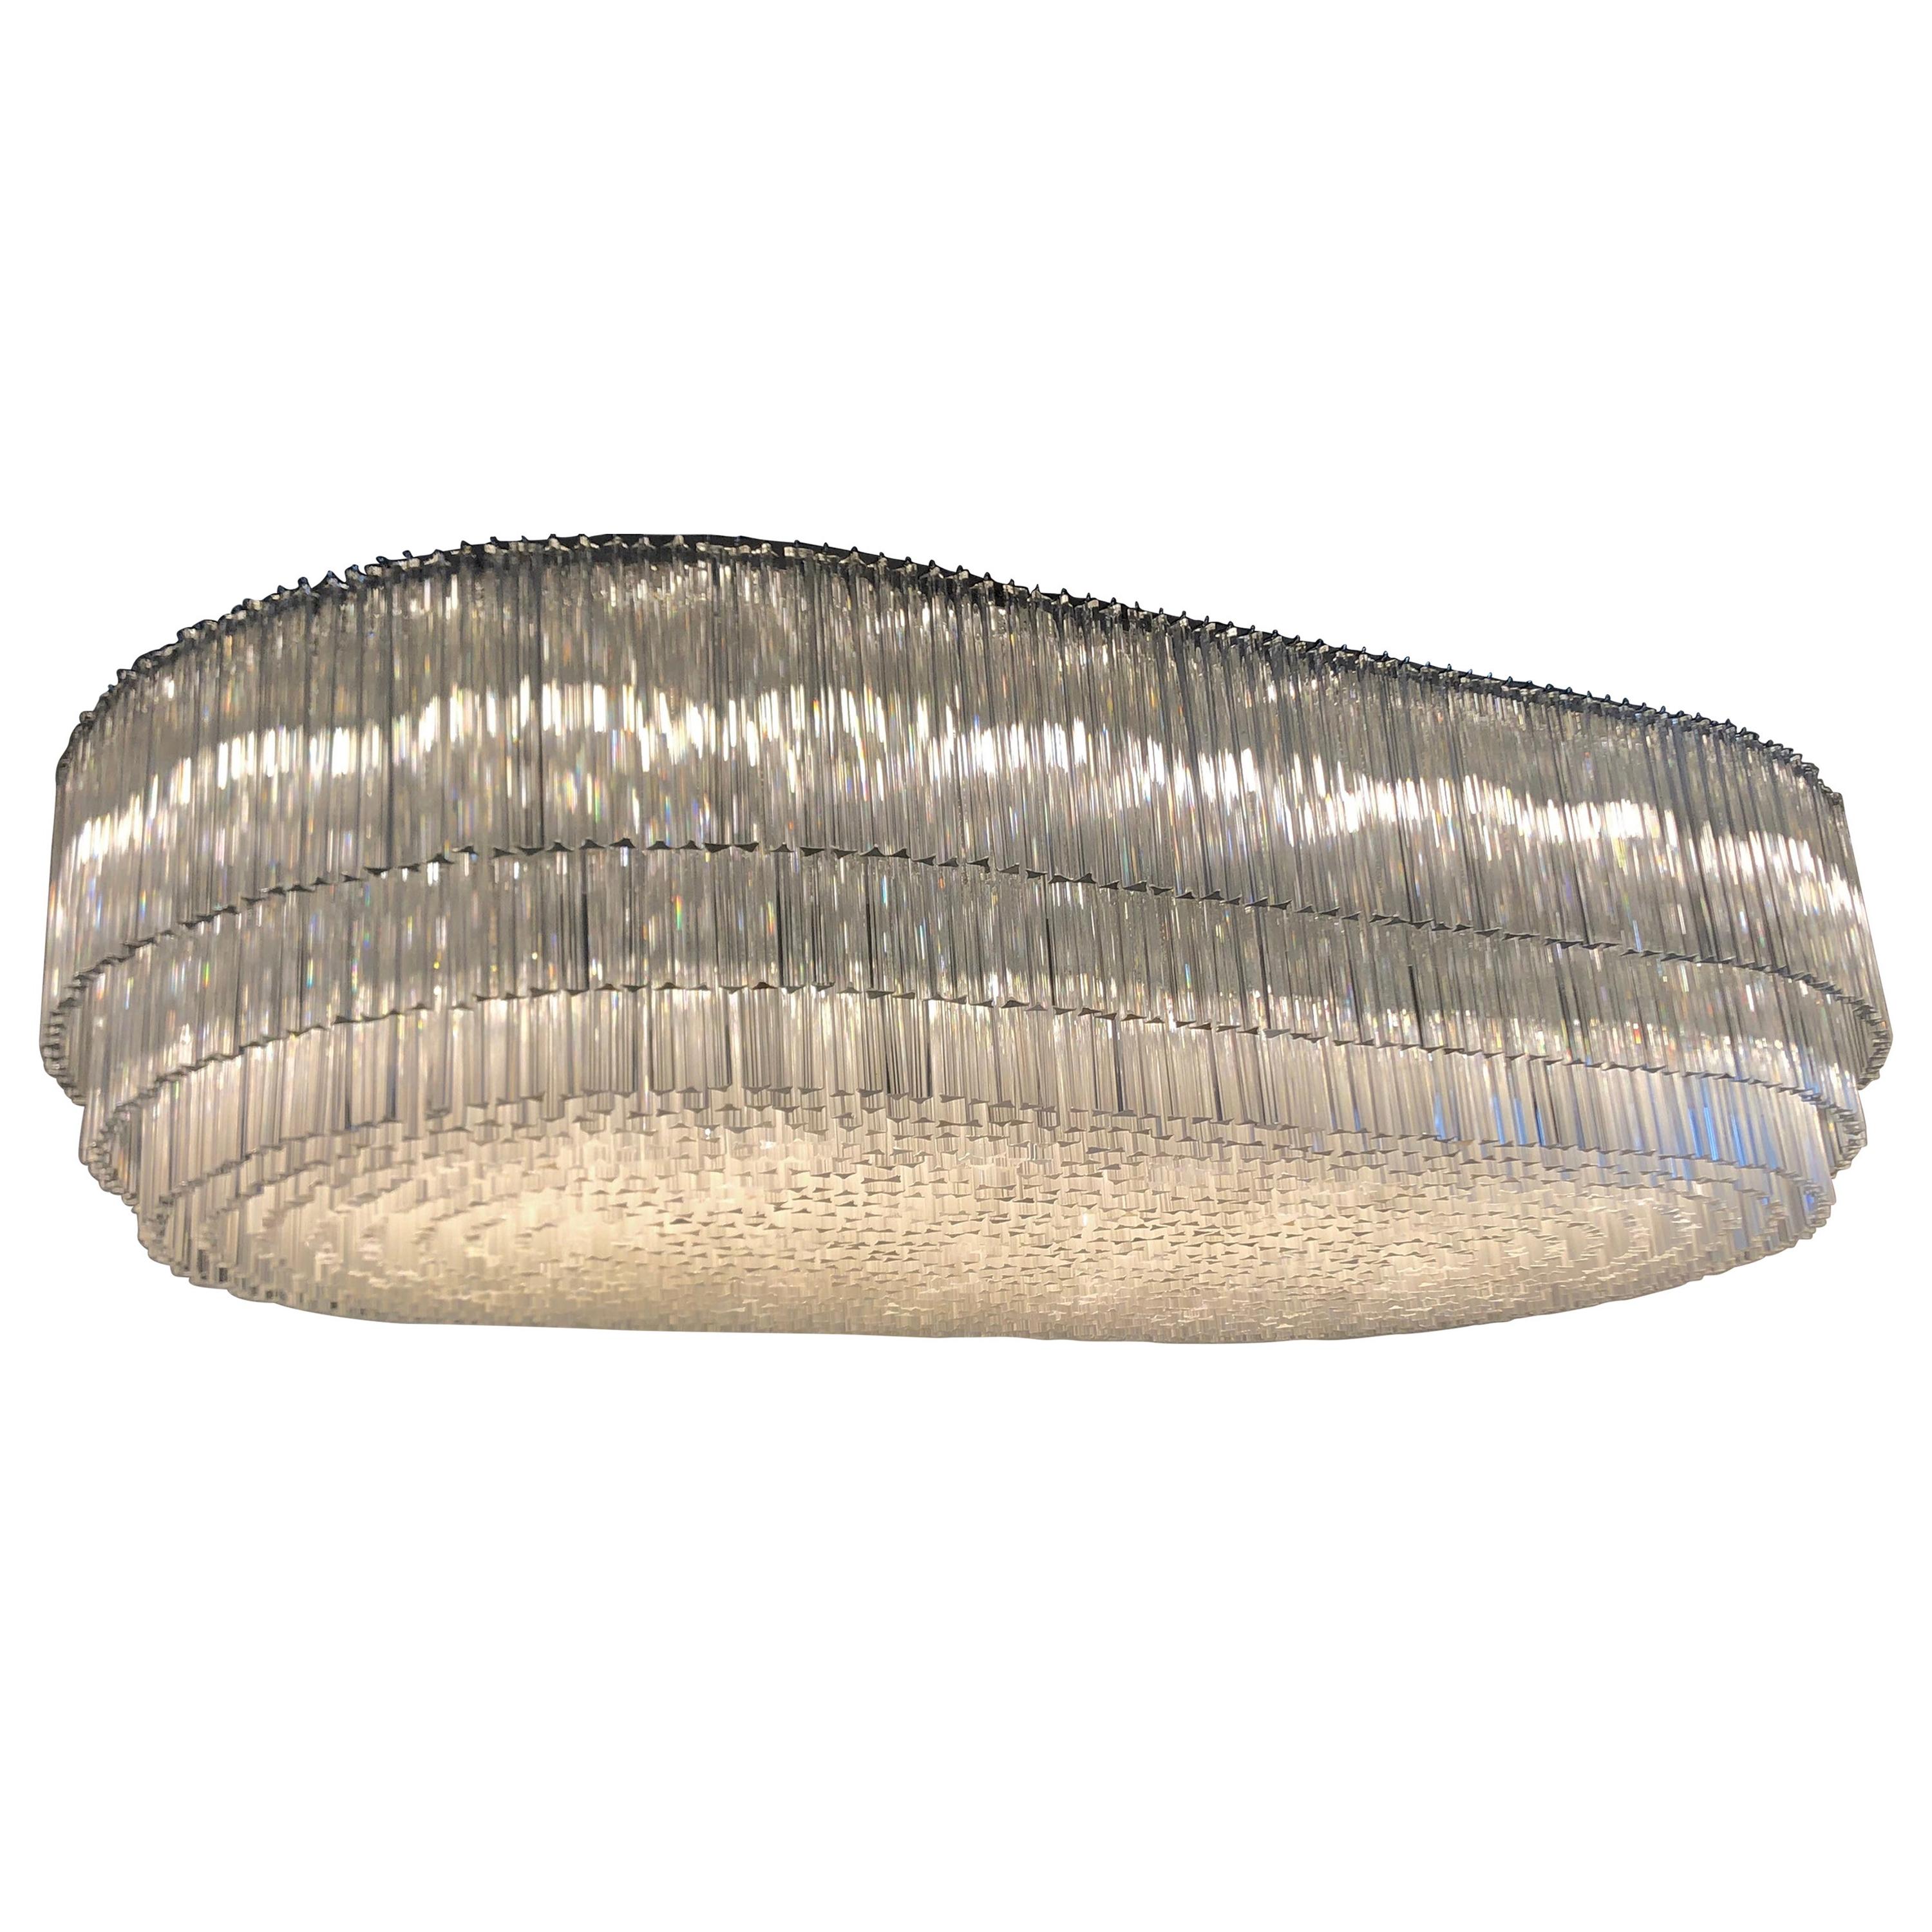 Monumental 70-Light Oval Murano Glass Chandelier, circa 1960s For Sale